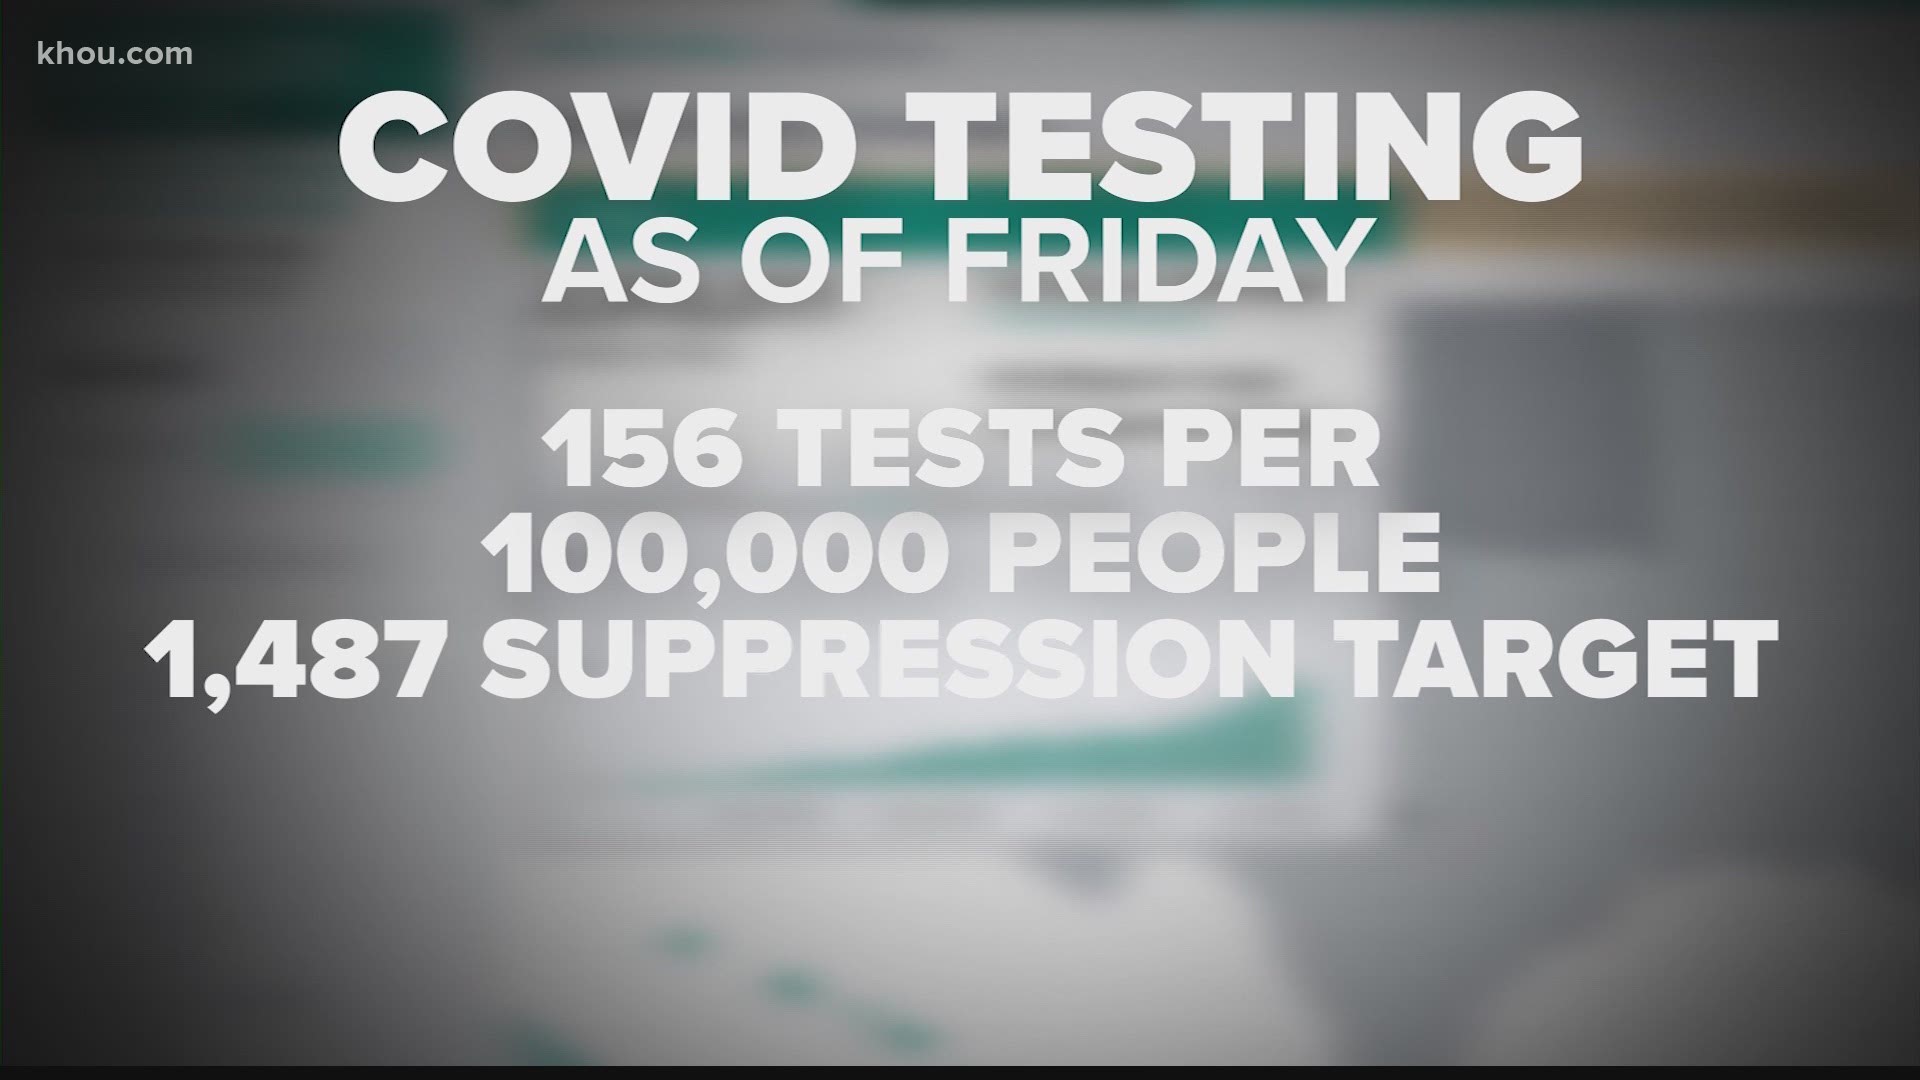 Texas is doing considerably fewer COVID-19 tests than it should to make a dent in the pandemic, according to the math done by scientists at Harvard.